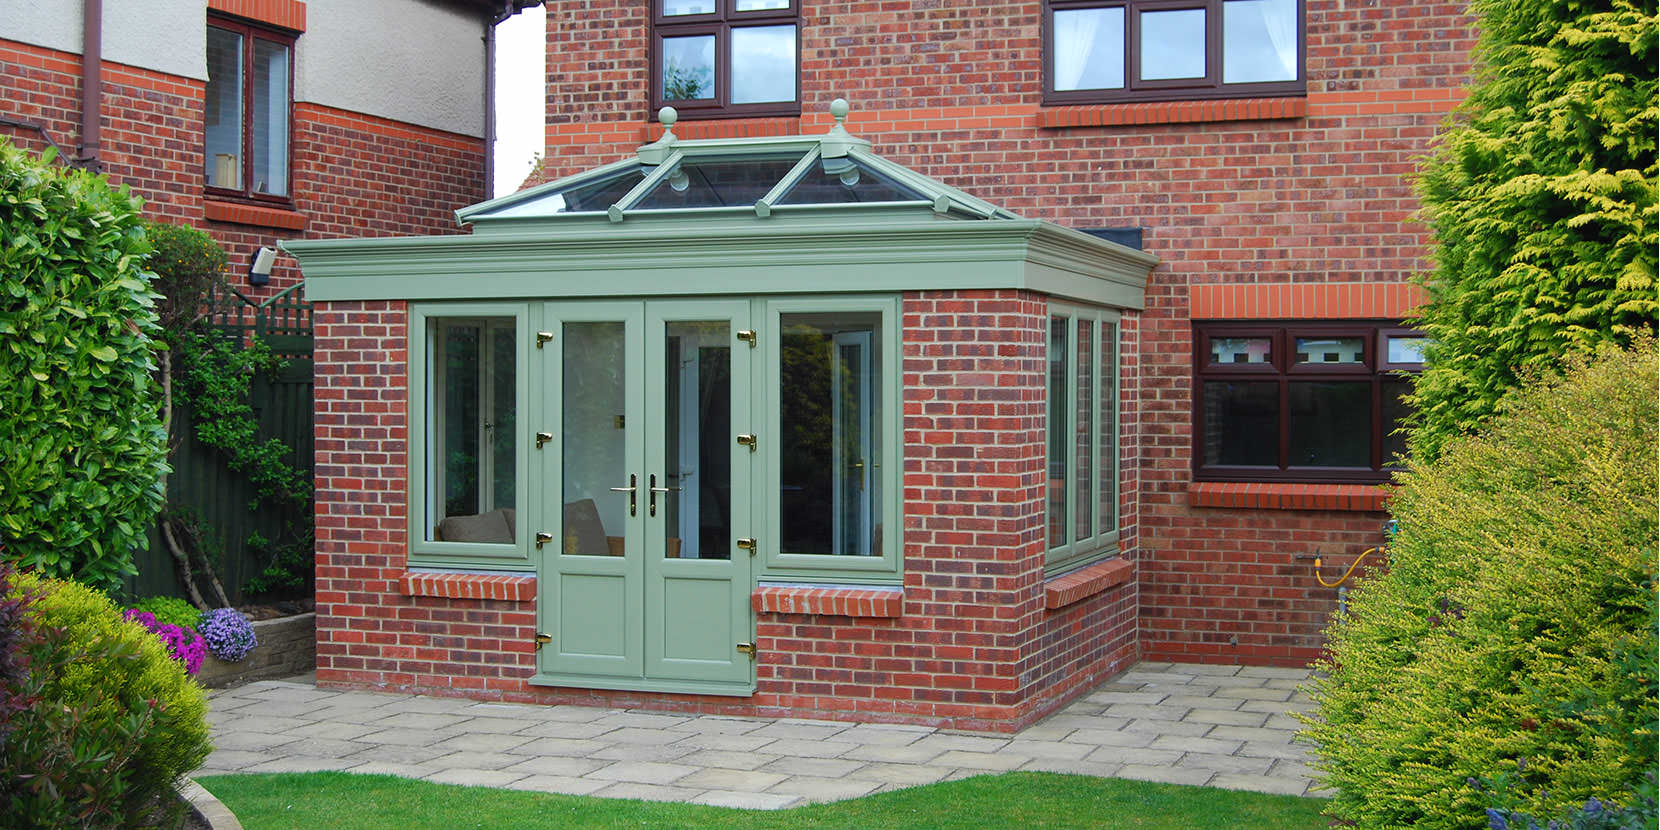 How to Furnish Your Orangery?